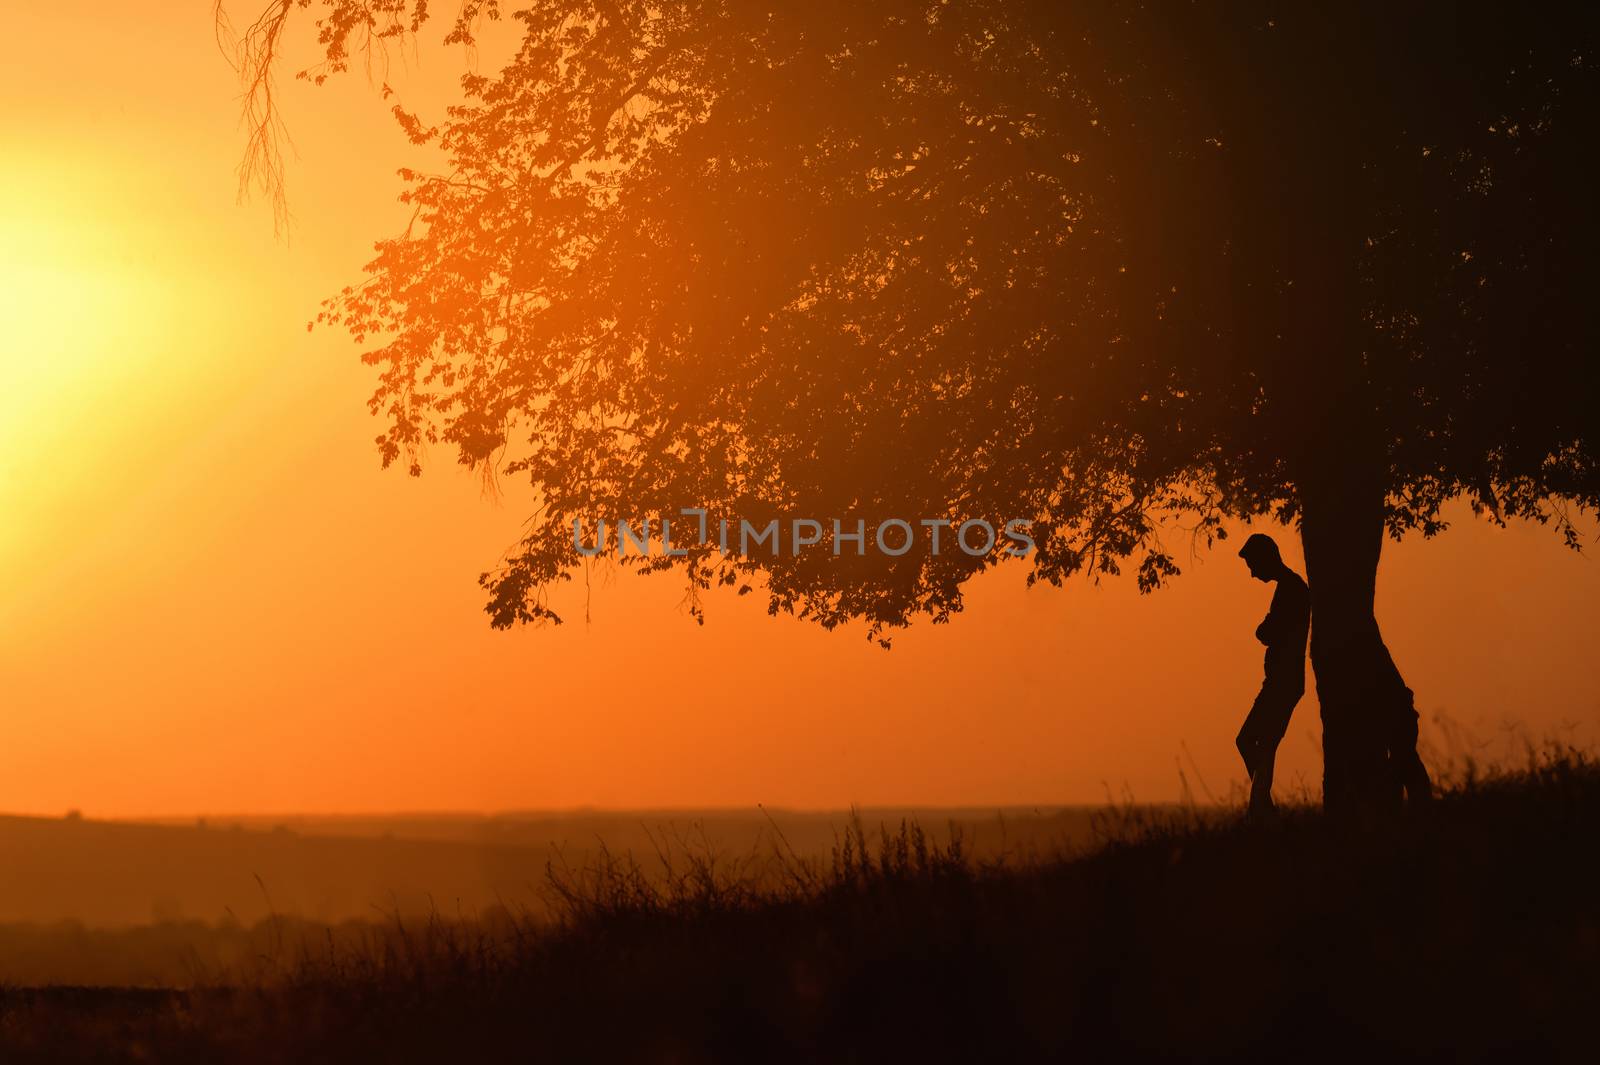 Oak and Man Silhouette with Sunset Light in Summer by mady70